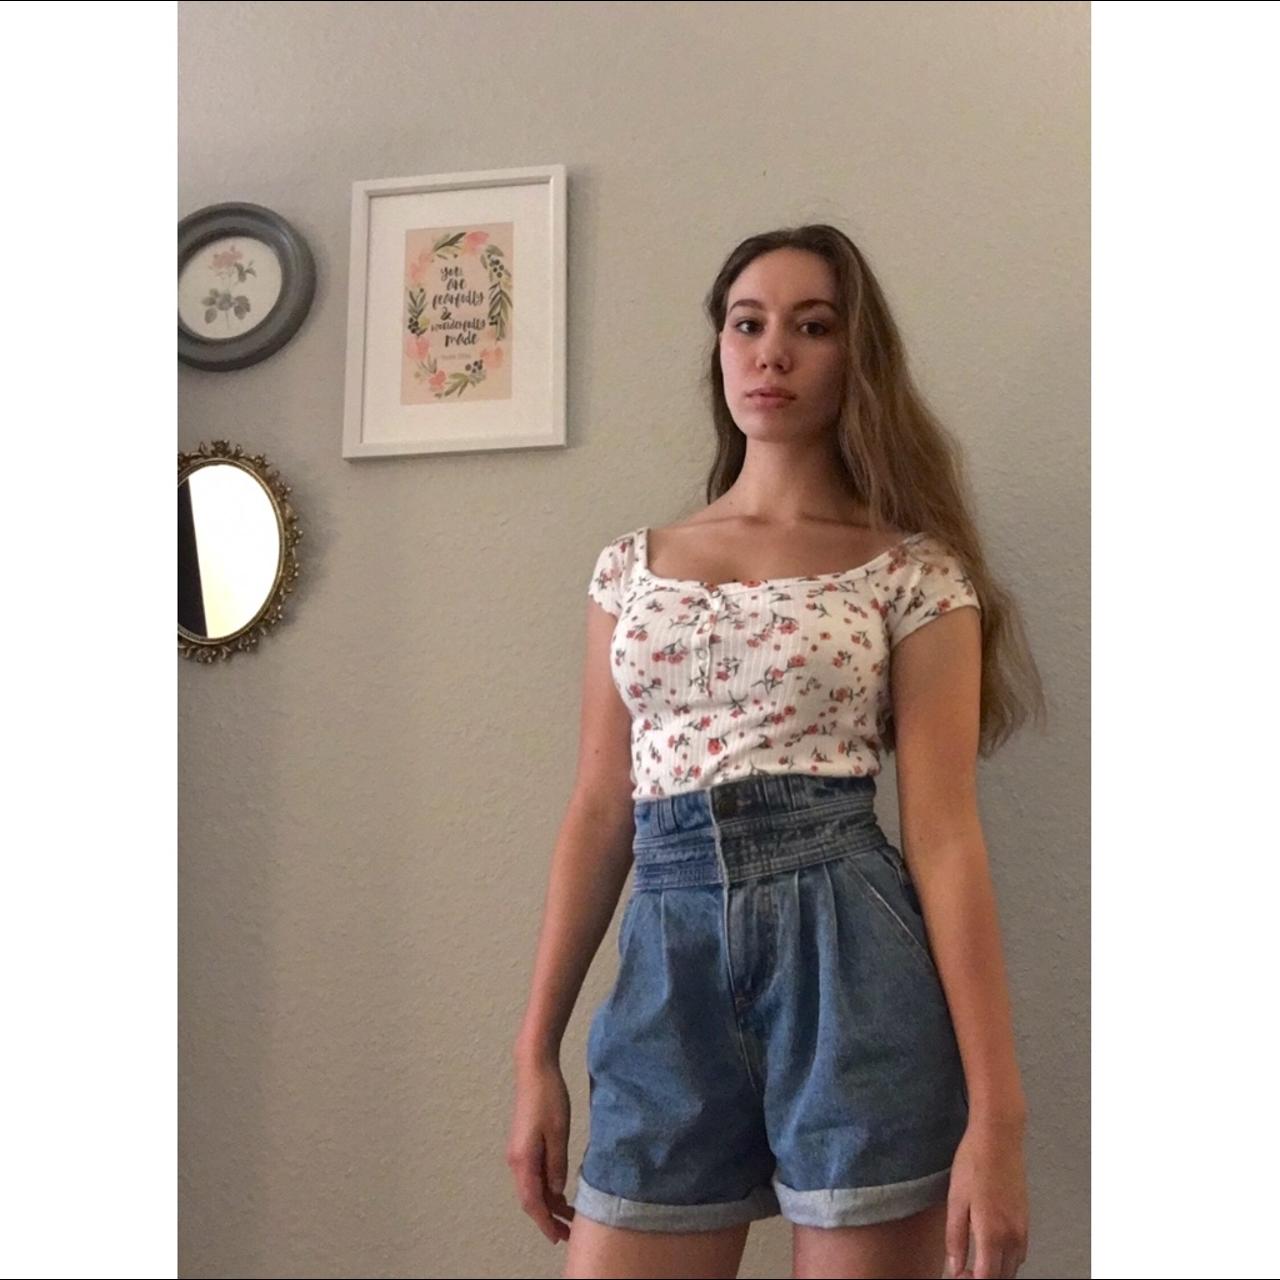 White and red floral top from Brandy Melville - Depop